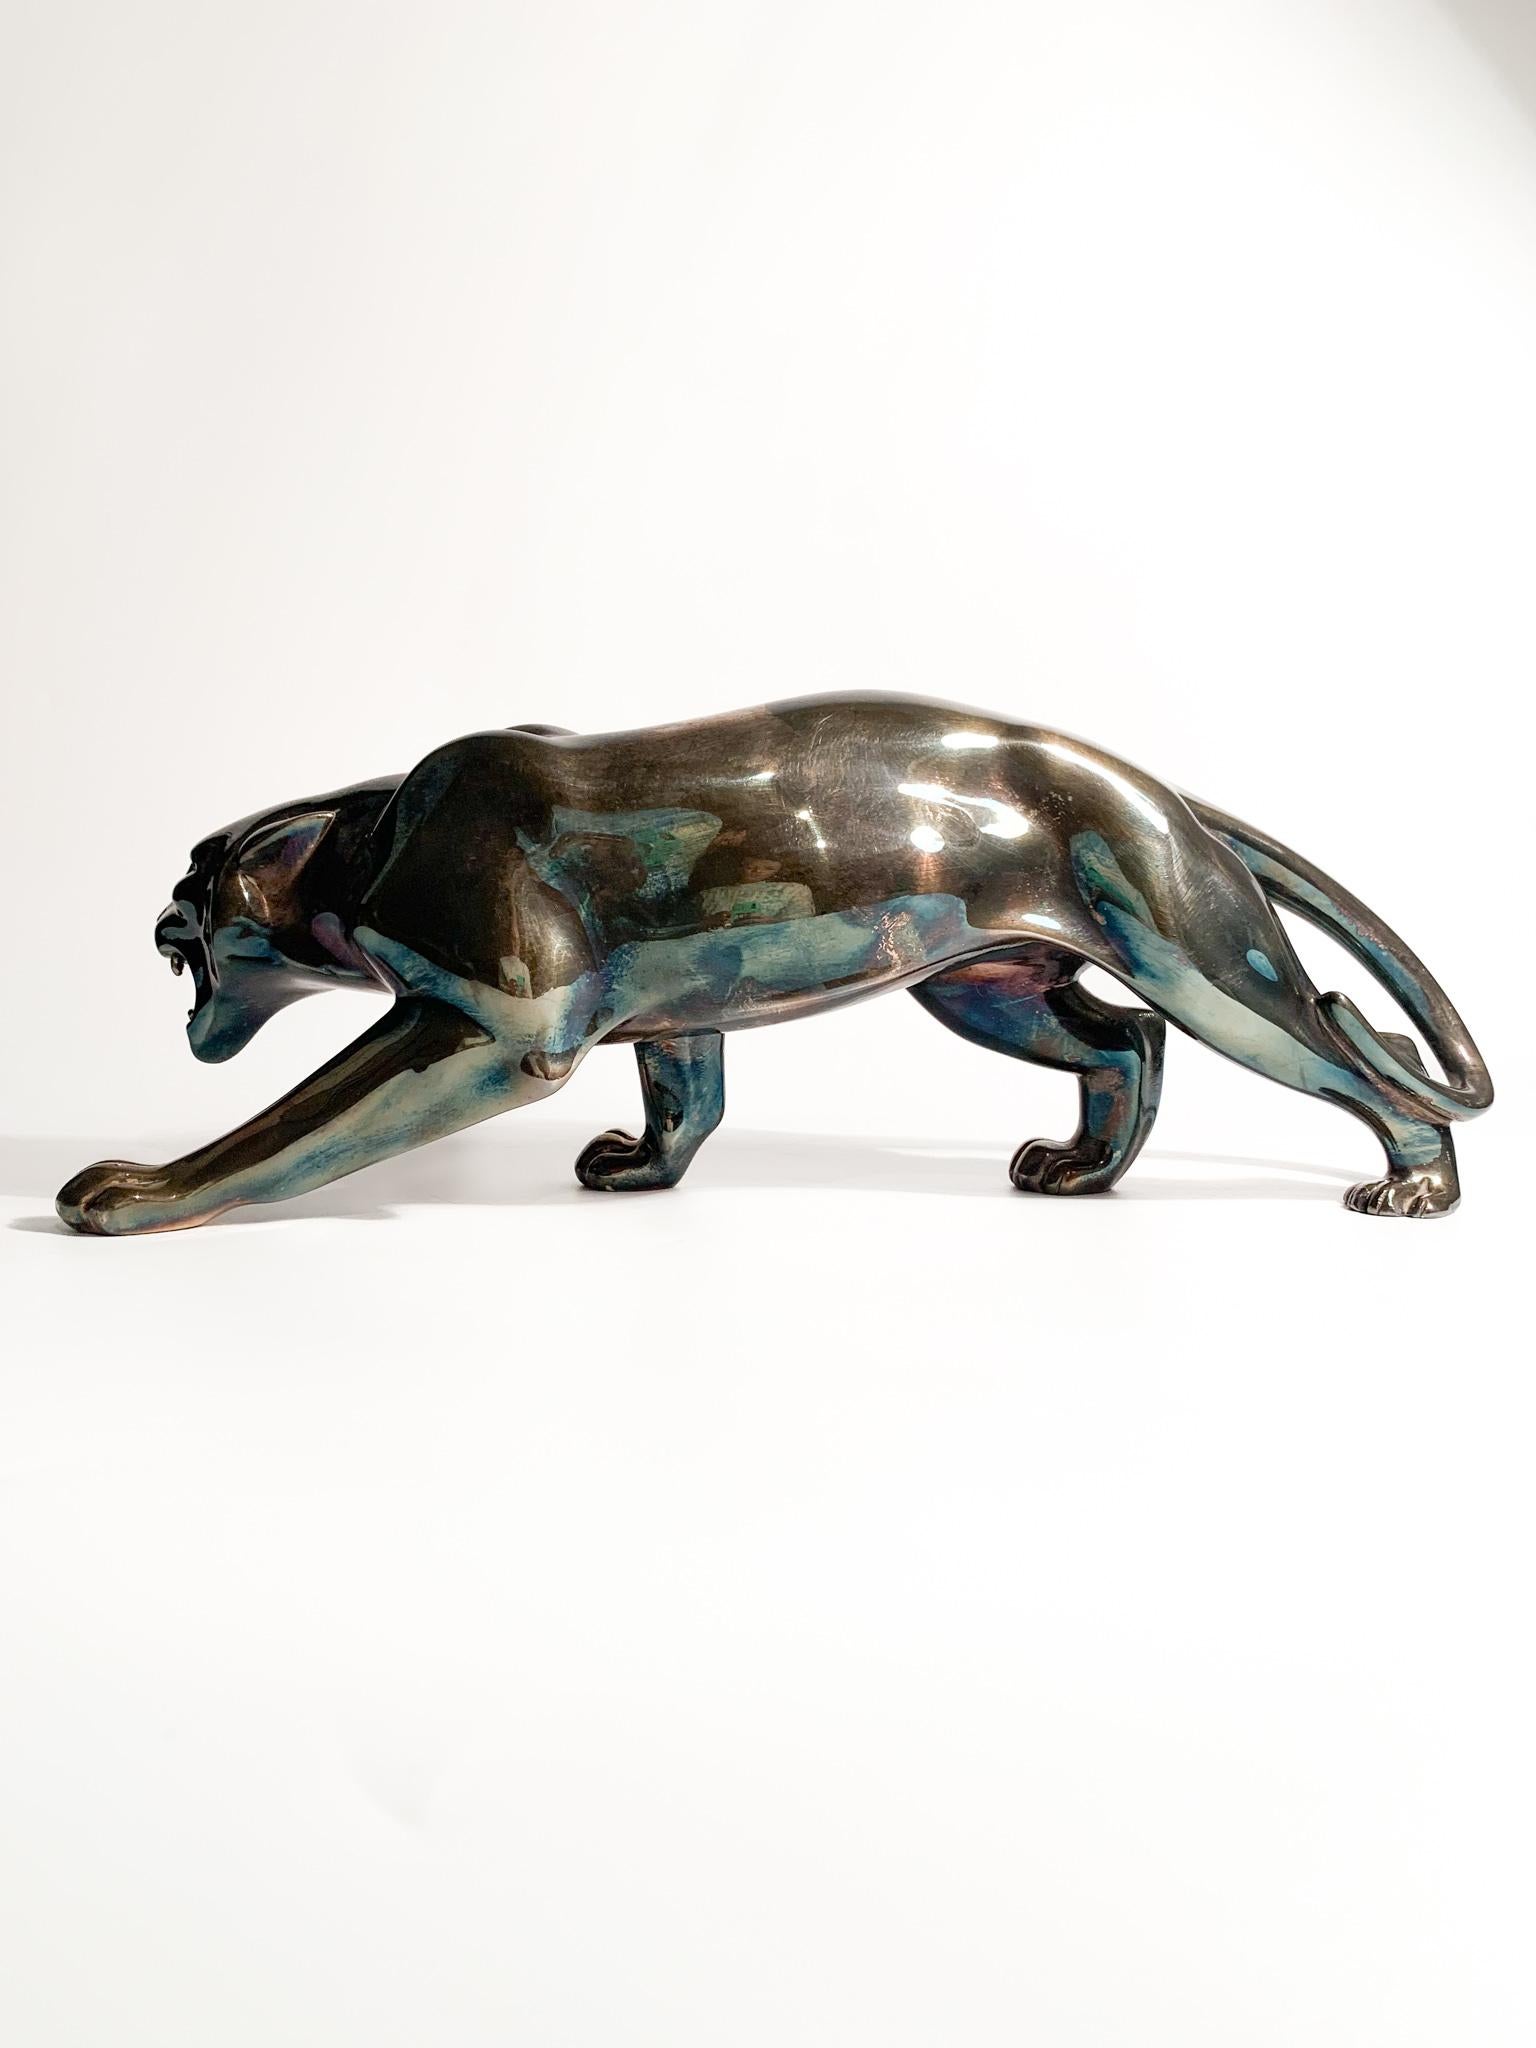 French Deco Sculpture of Feline with Silver Casting from the 1930s For Sale 1